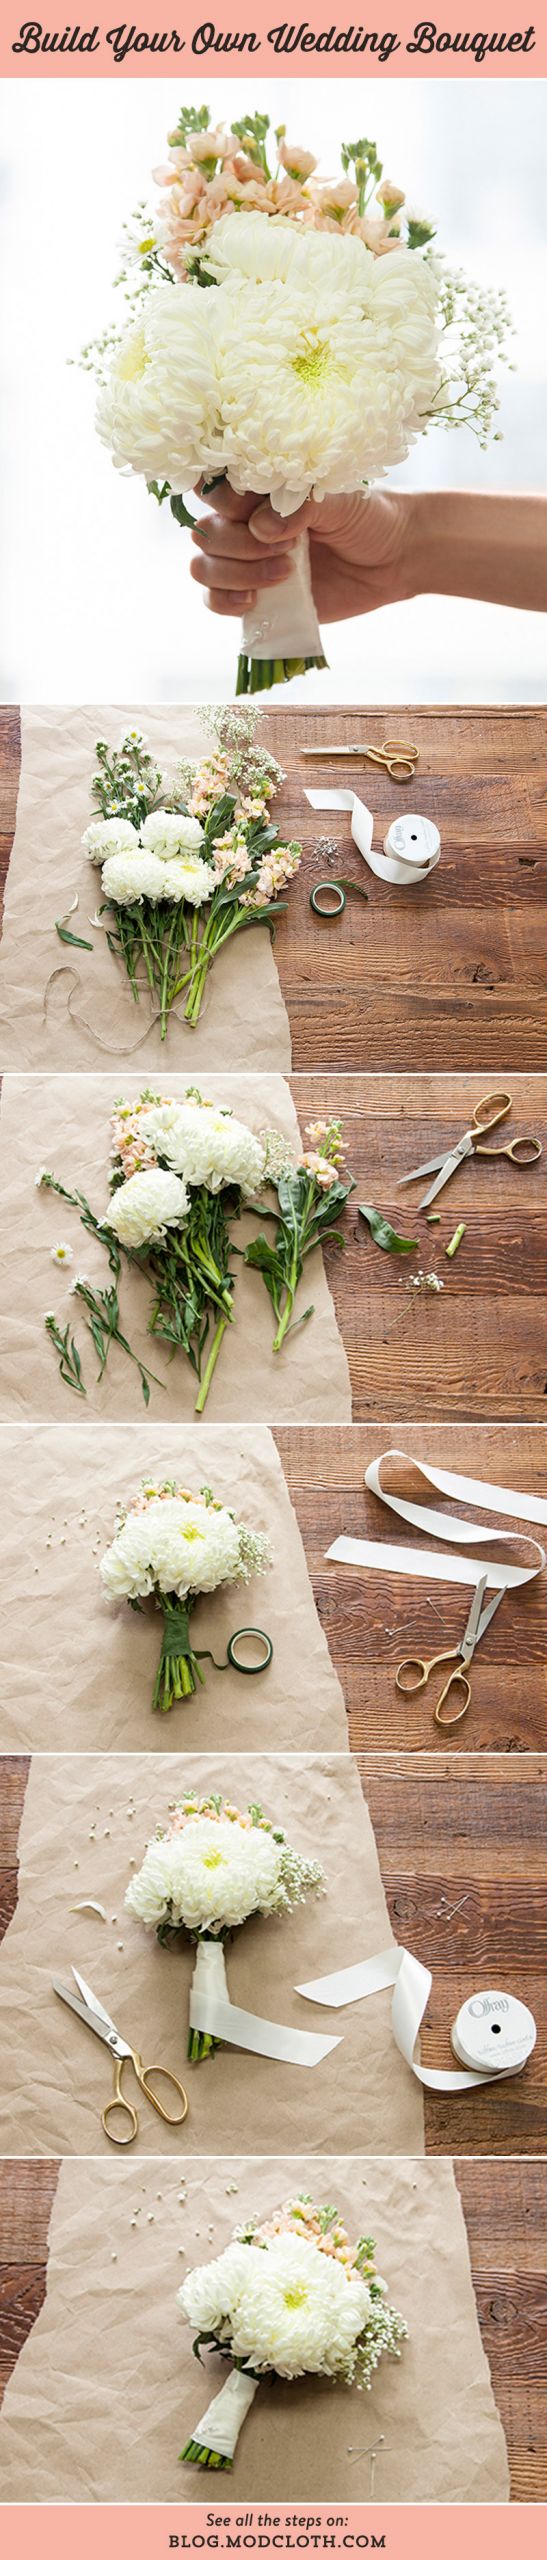 How To DIY Wedding Flowers
 Build Your Own Wedding Bouquet With This Easy DIY